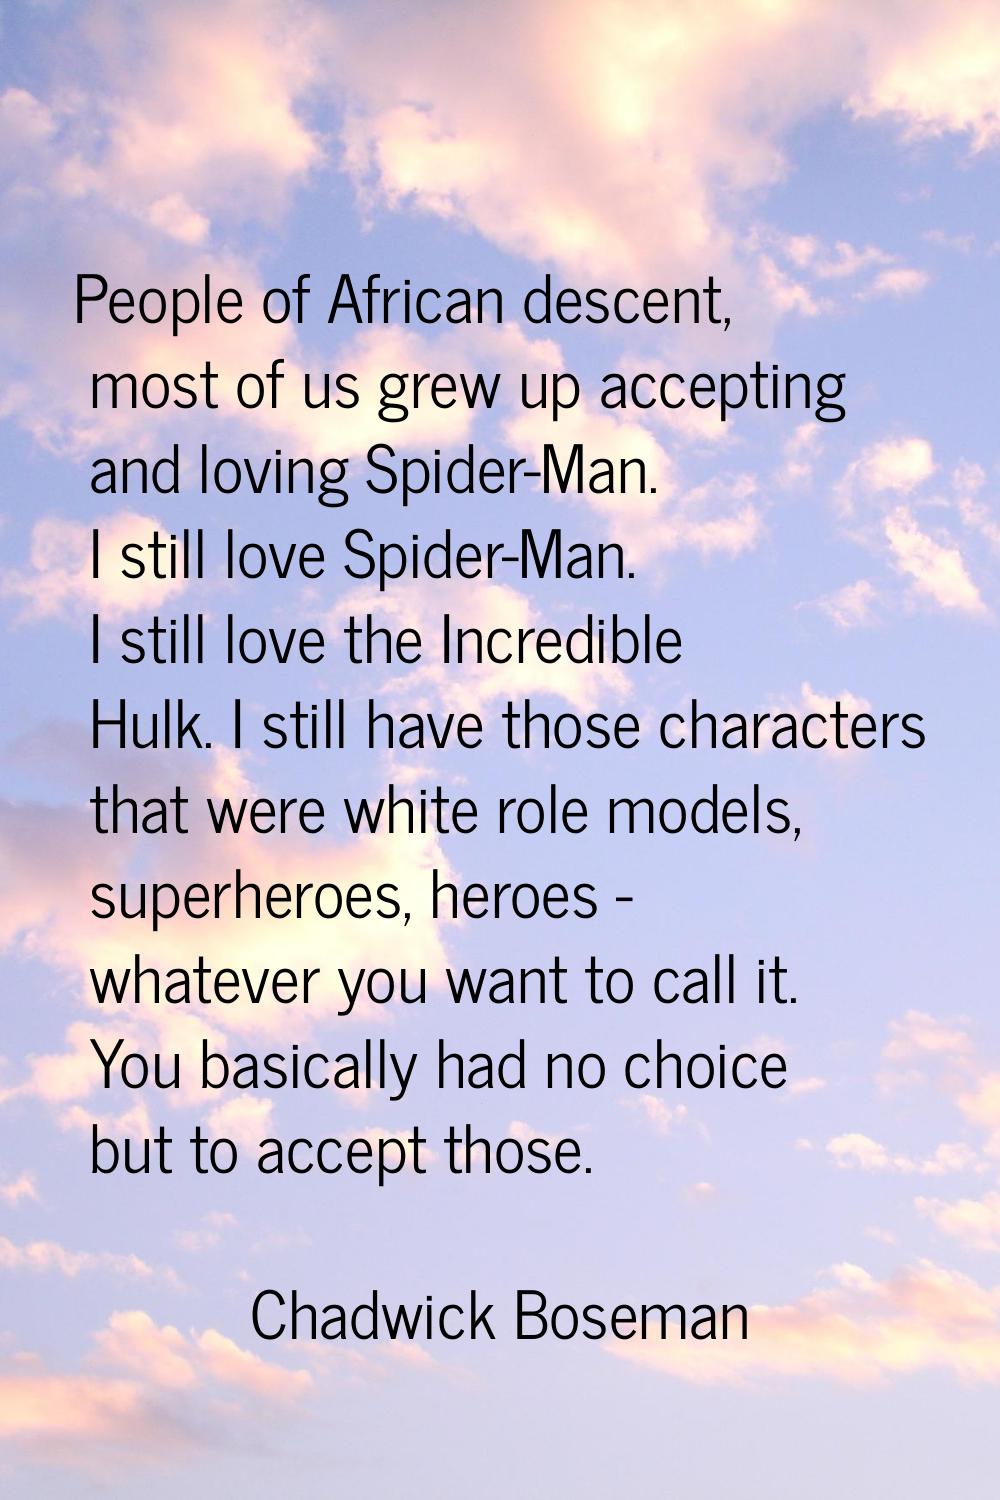 People of African descent, most of us grew up accepting and loving Spider-Man. I still love Spider-